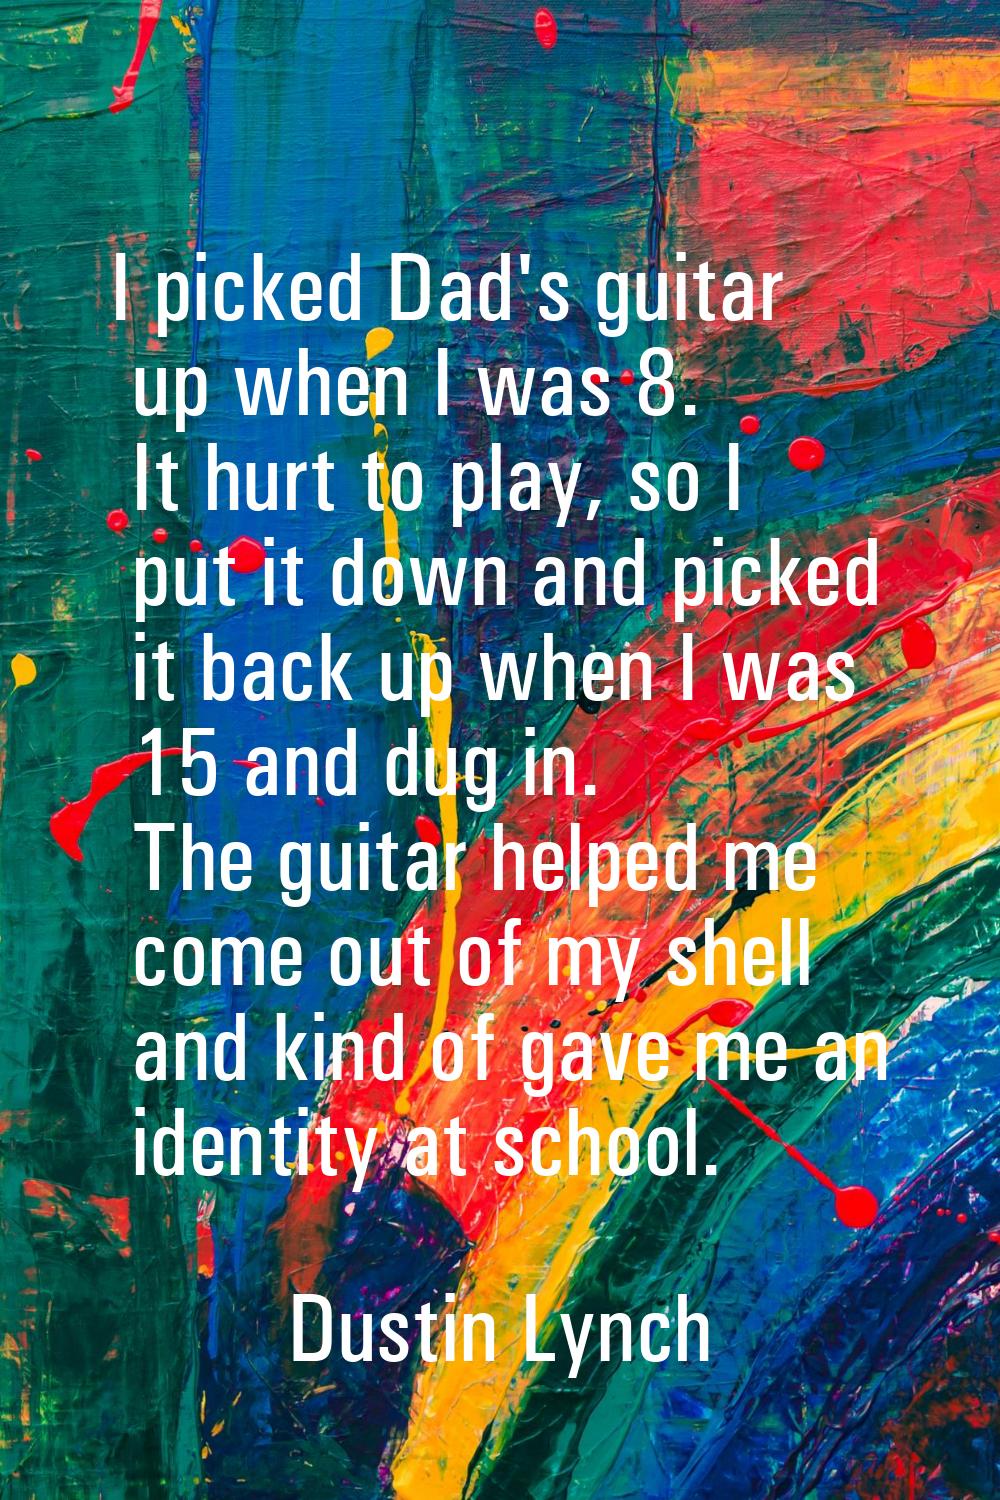 I picked Dad's guitar up when I was 8. It hurt to play, so I put it down and picked it back up when